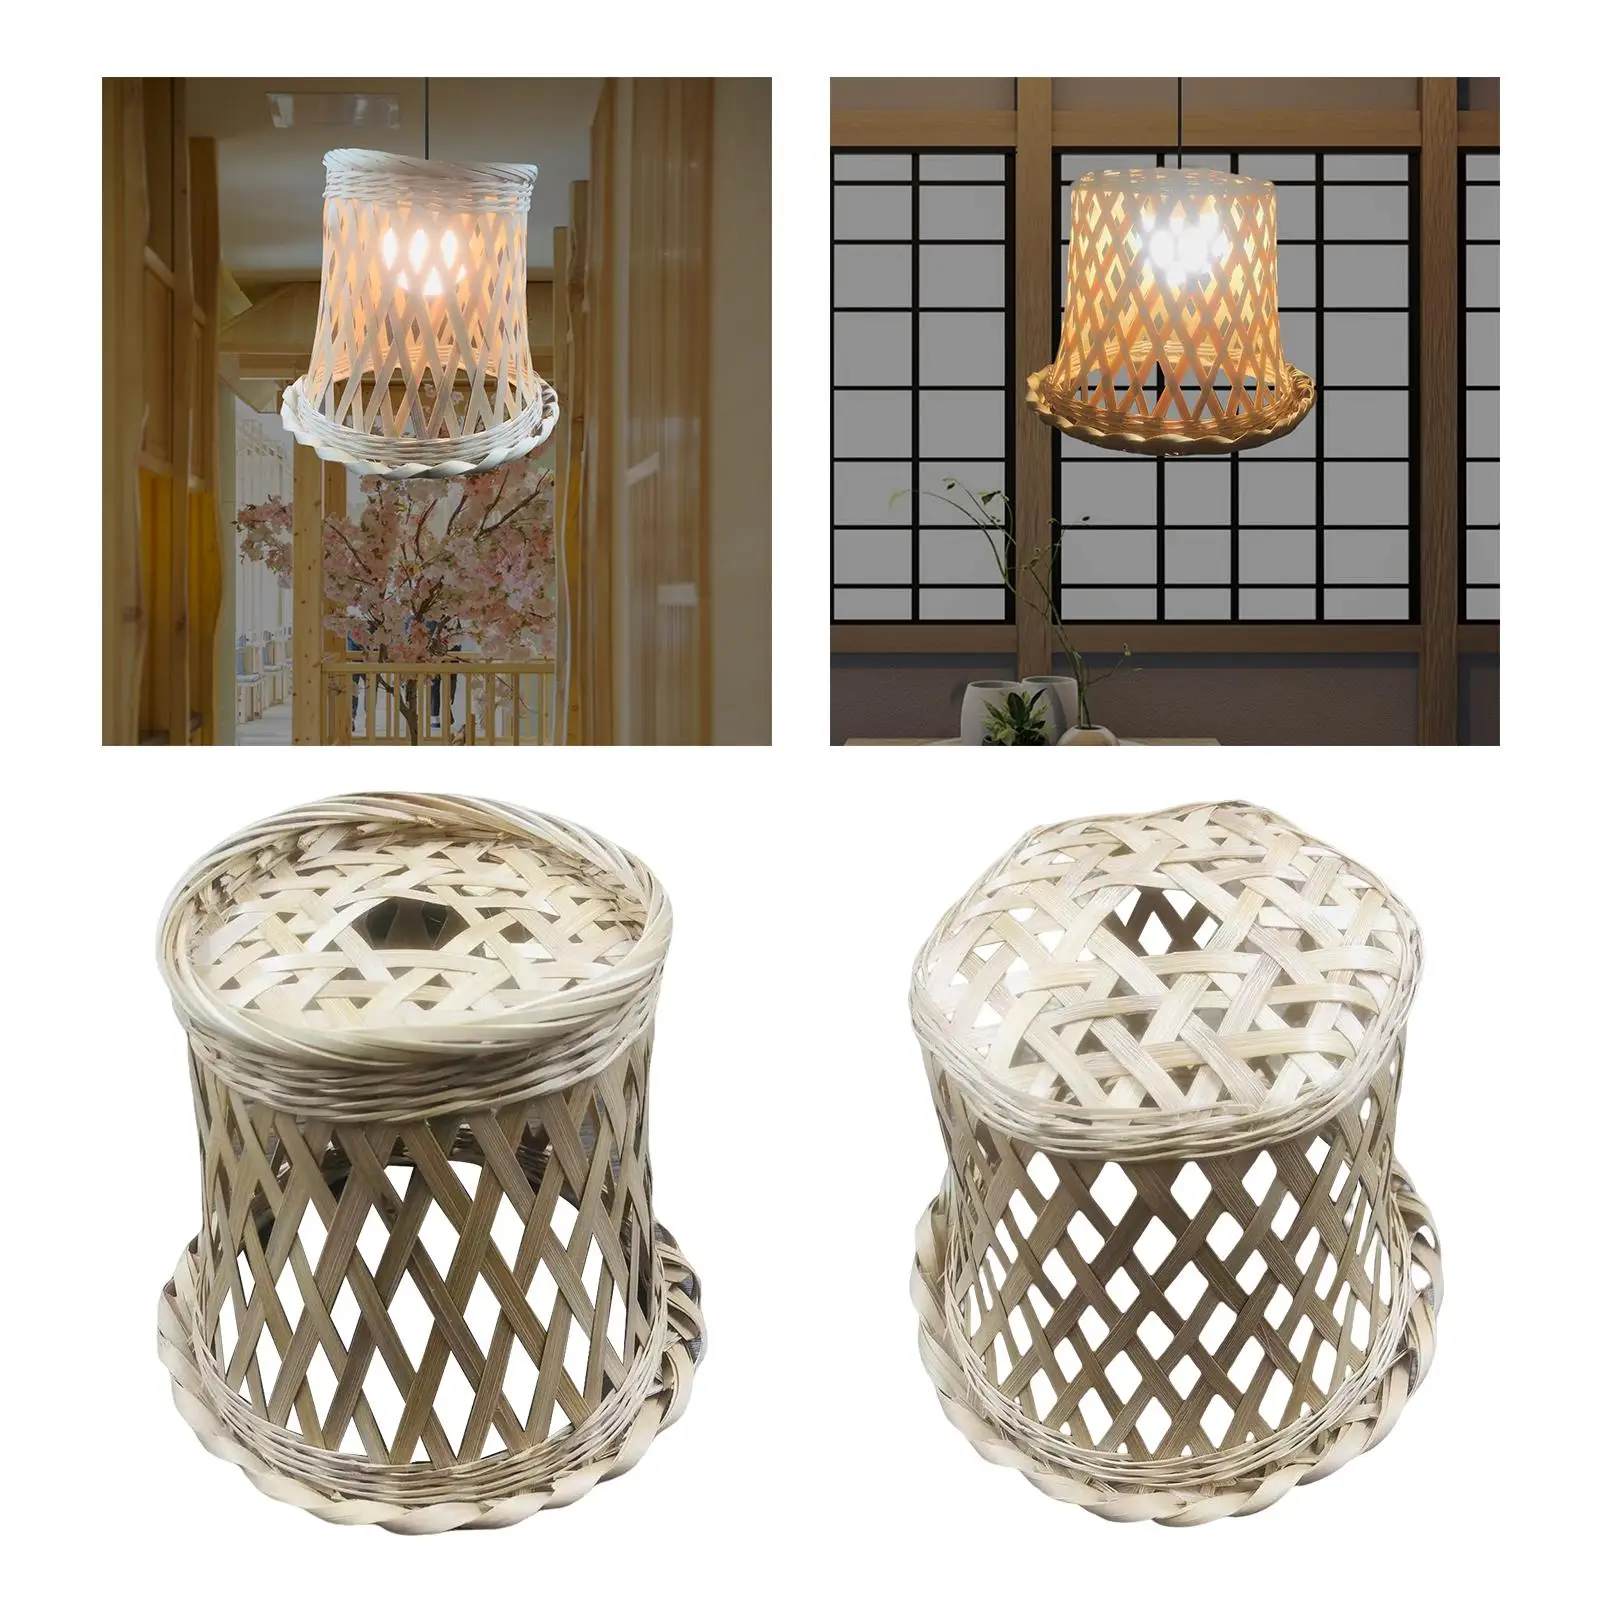 Bamboo Lamp Shade Covers LED Pendant Light for Ceiling Light Fixture Nursery Office